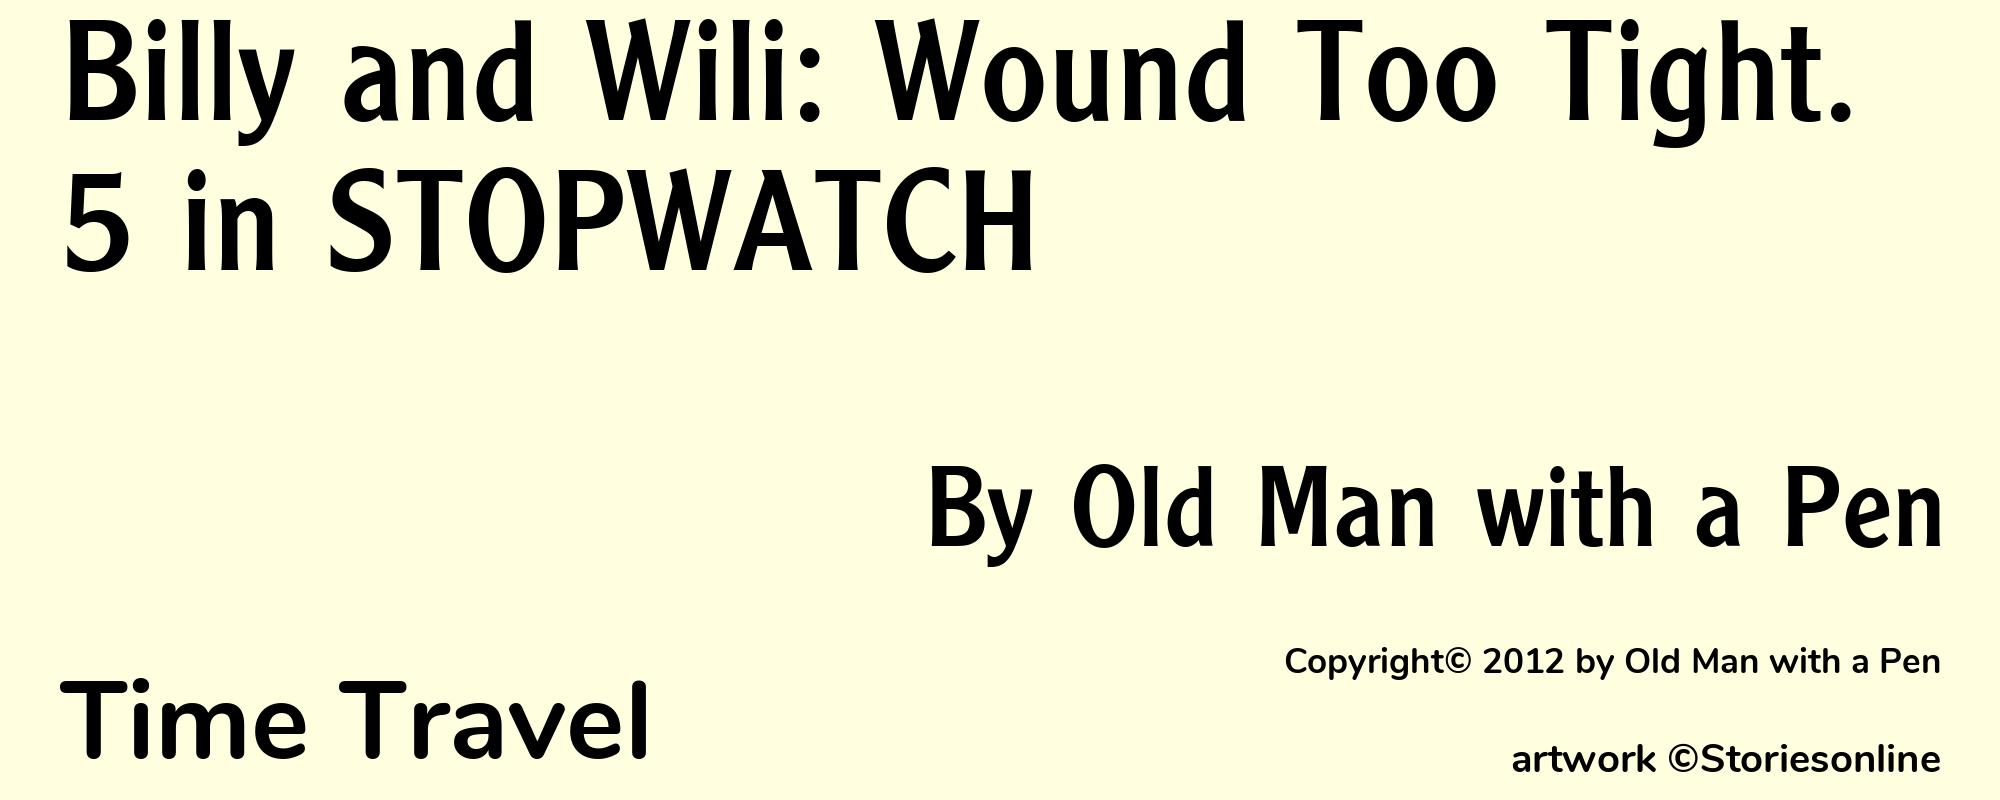 Billy and Wili: Wound Too Tight. 5 in STOPWATCH - Cover